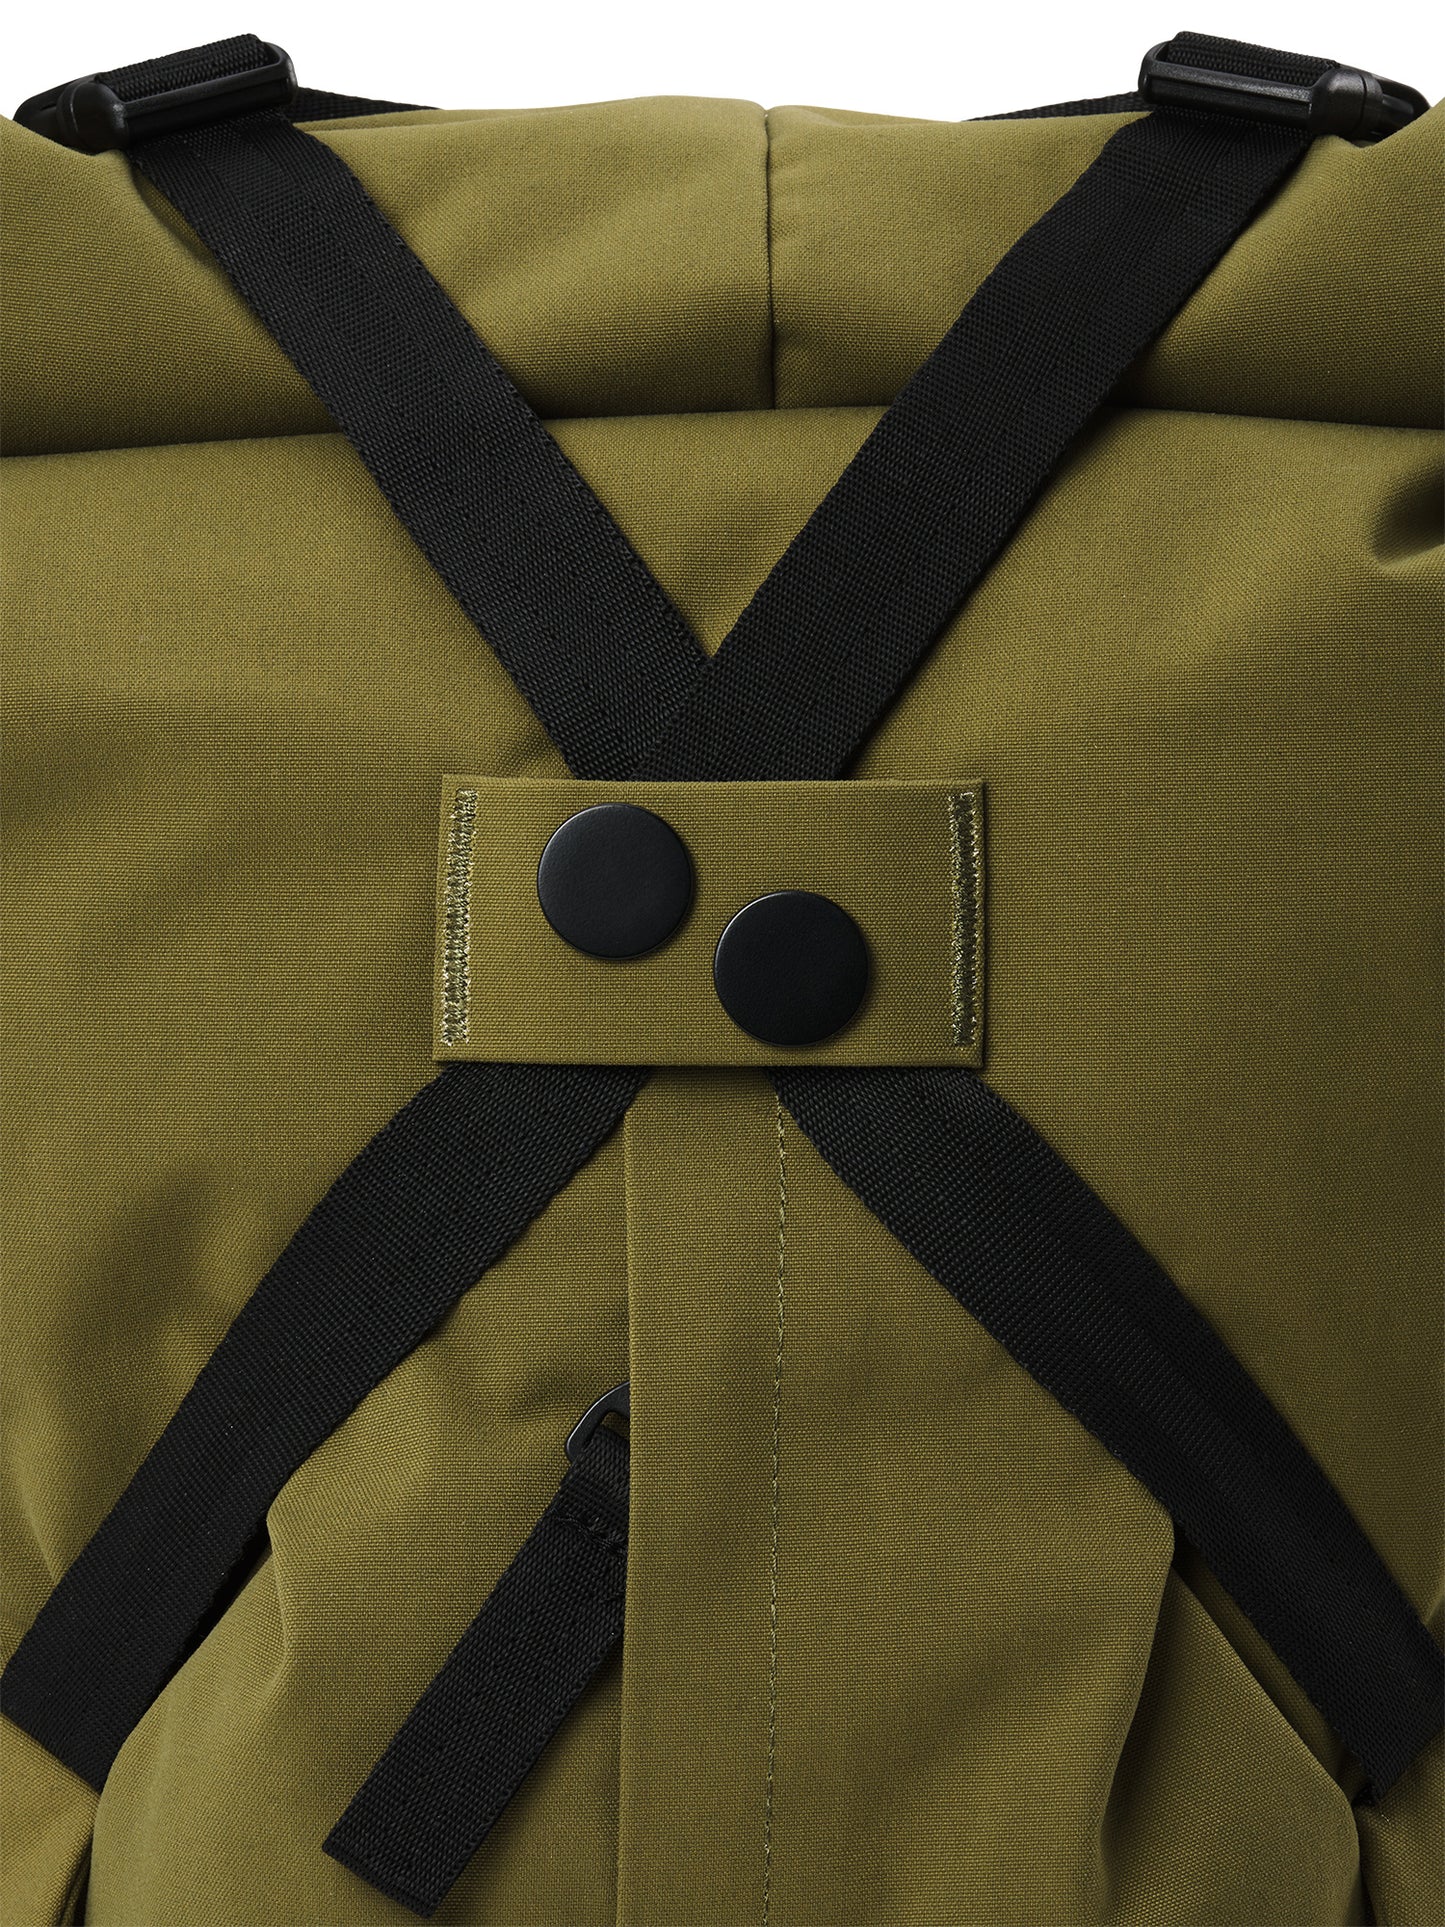 pinqponq-Kross-Solid-Olive-material